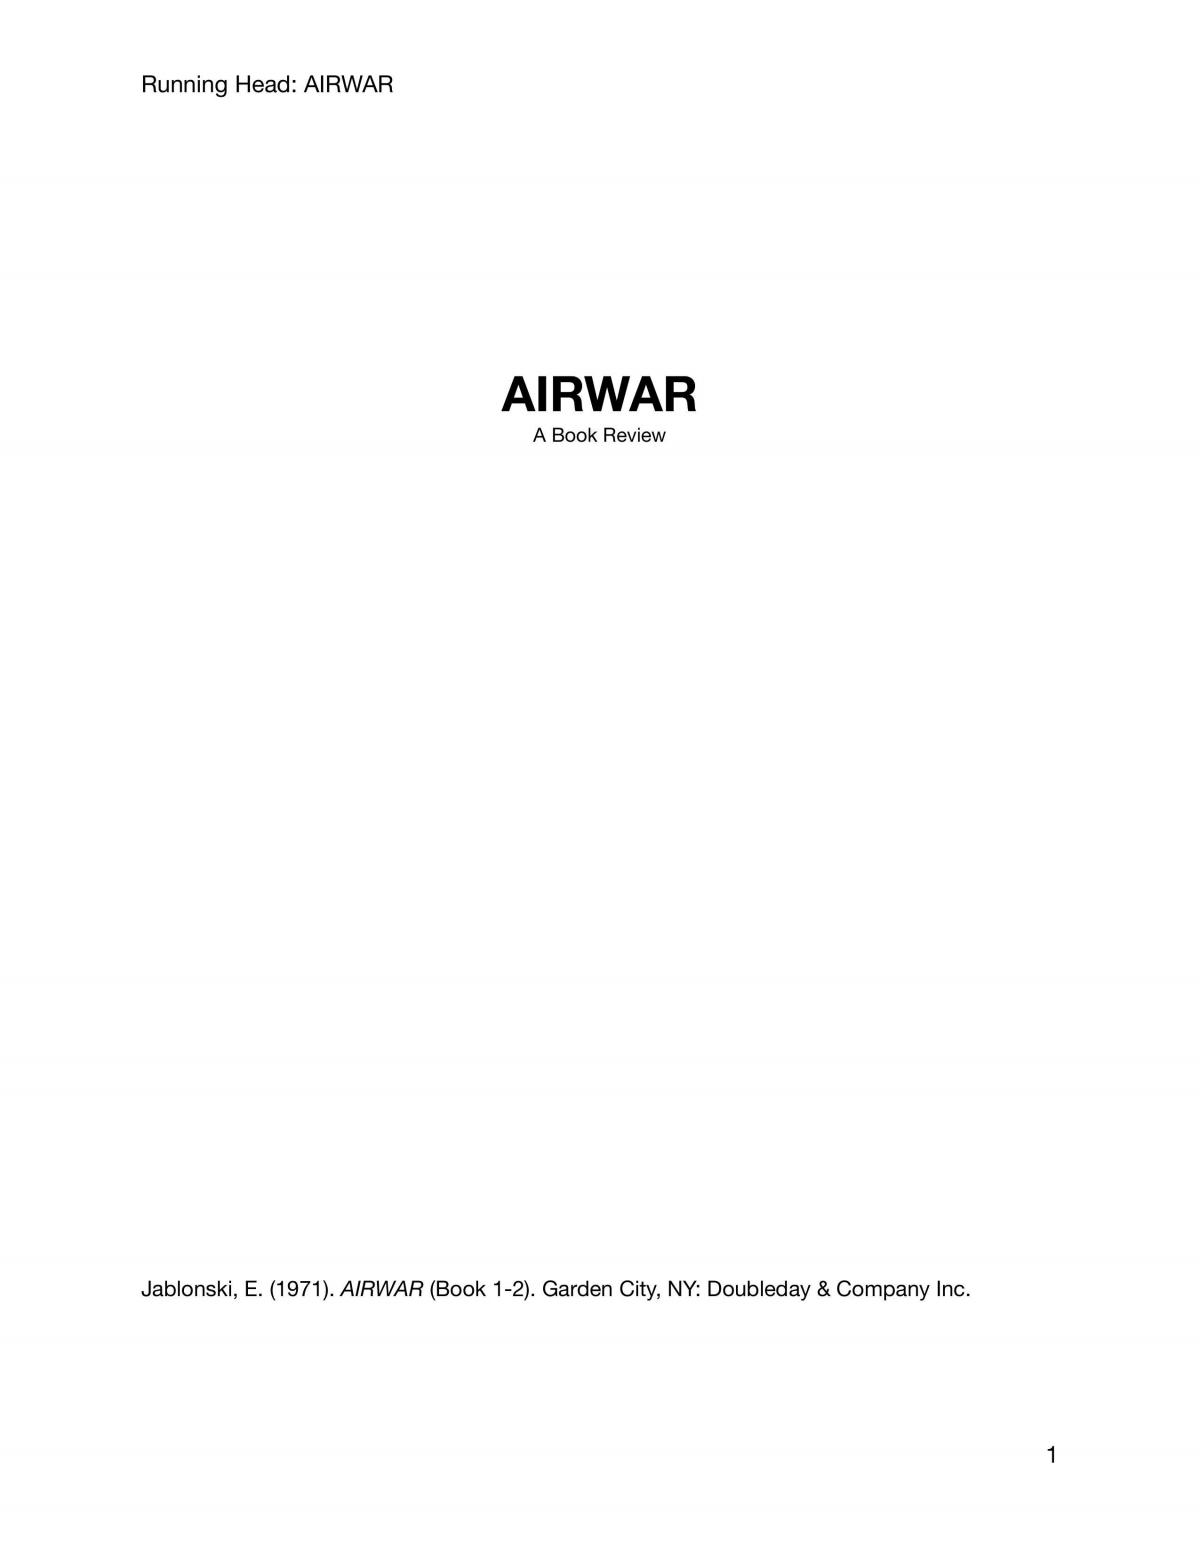 A Book Review on Airwar - Page 1